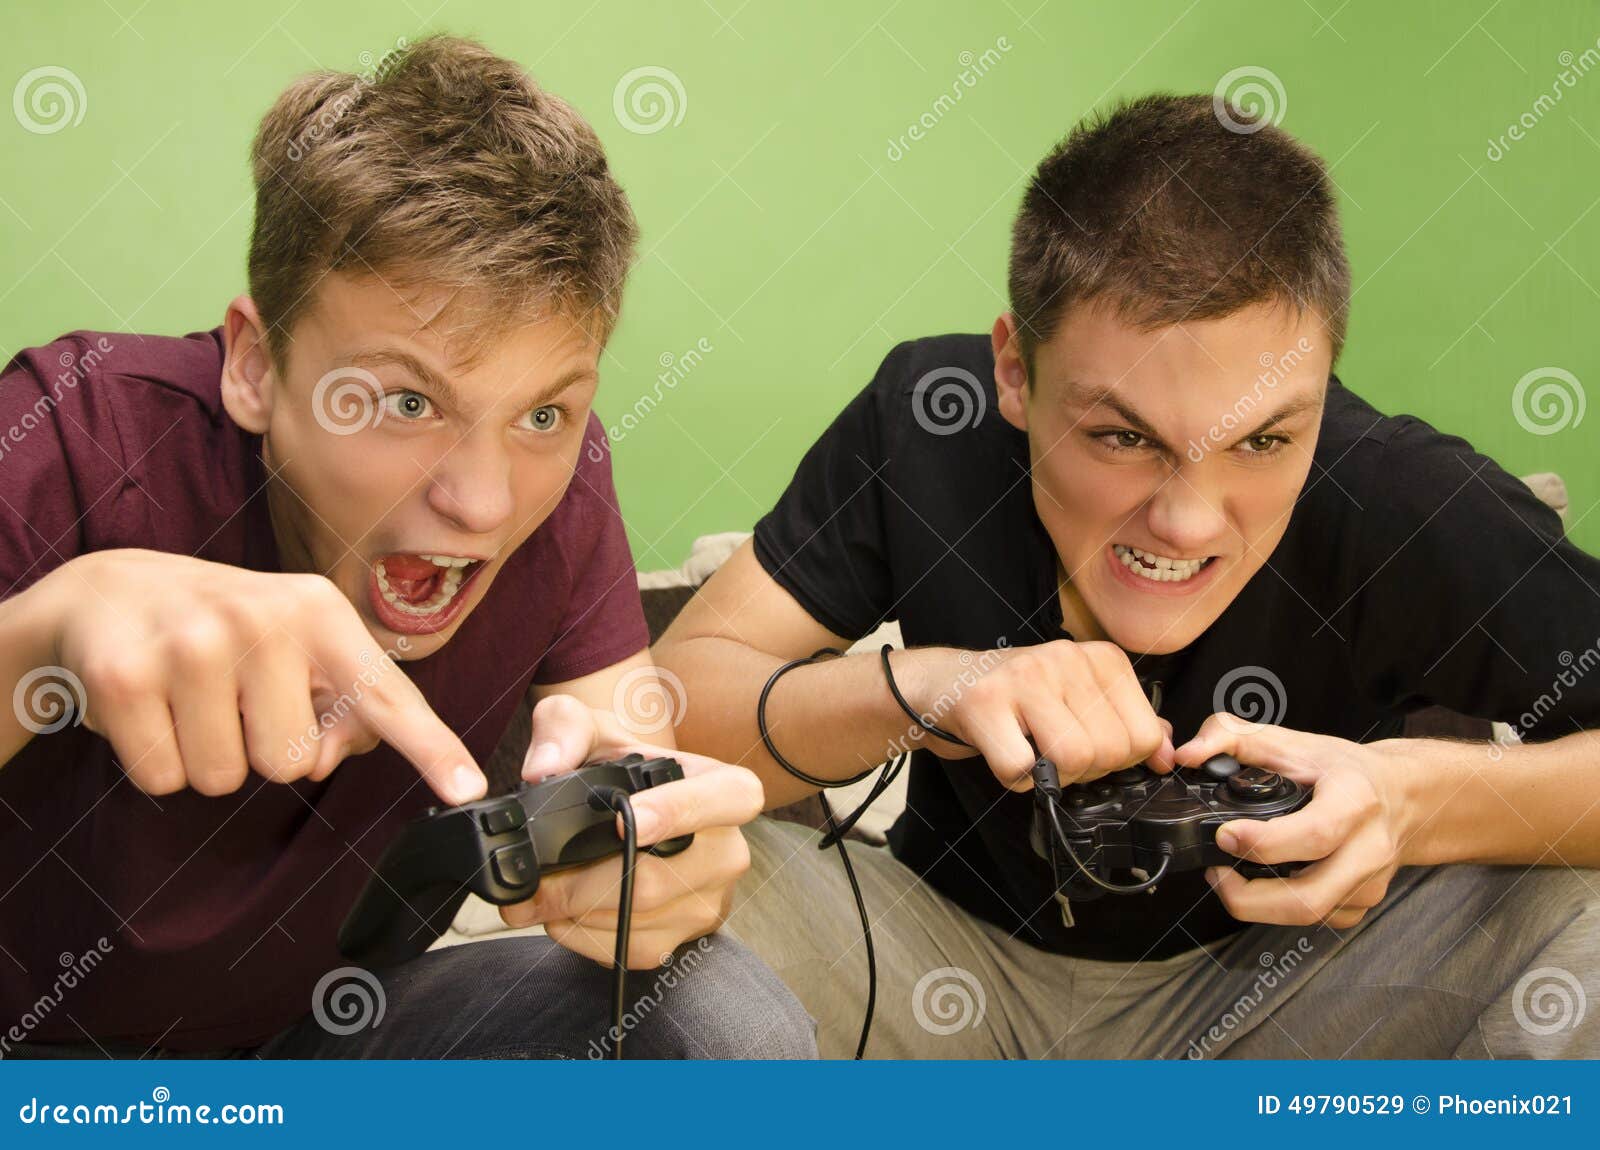 209 Funny Kids Playing Video Games Stock Photos - Free & Royalty-Free Stock  Photos from Dreamstime